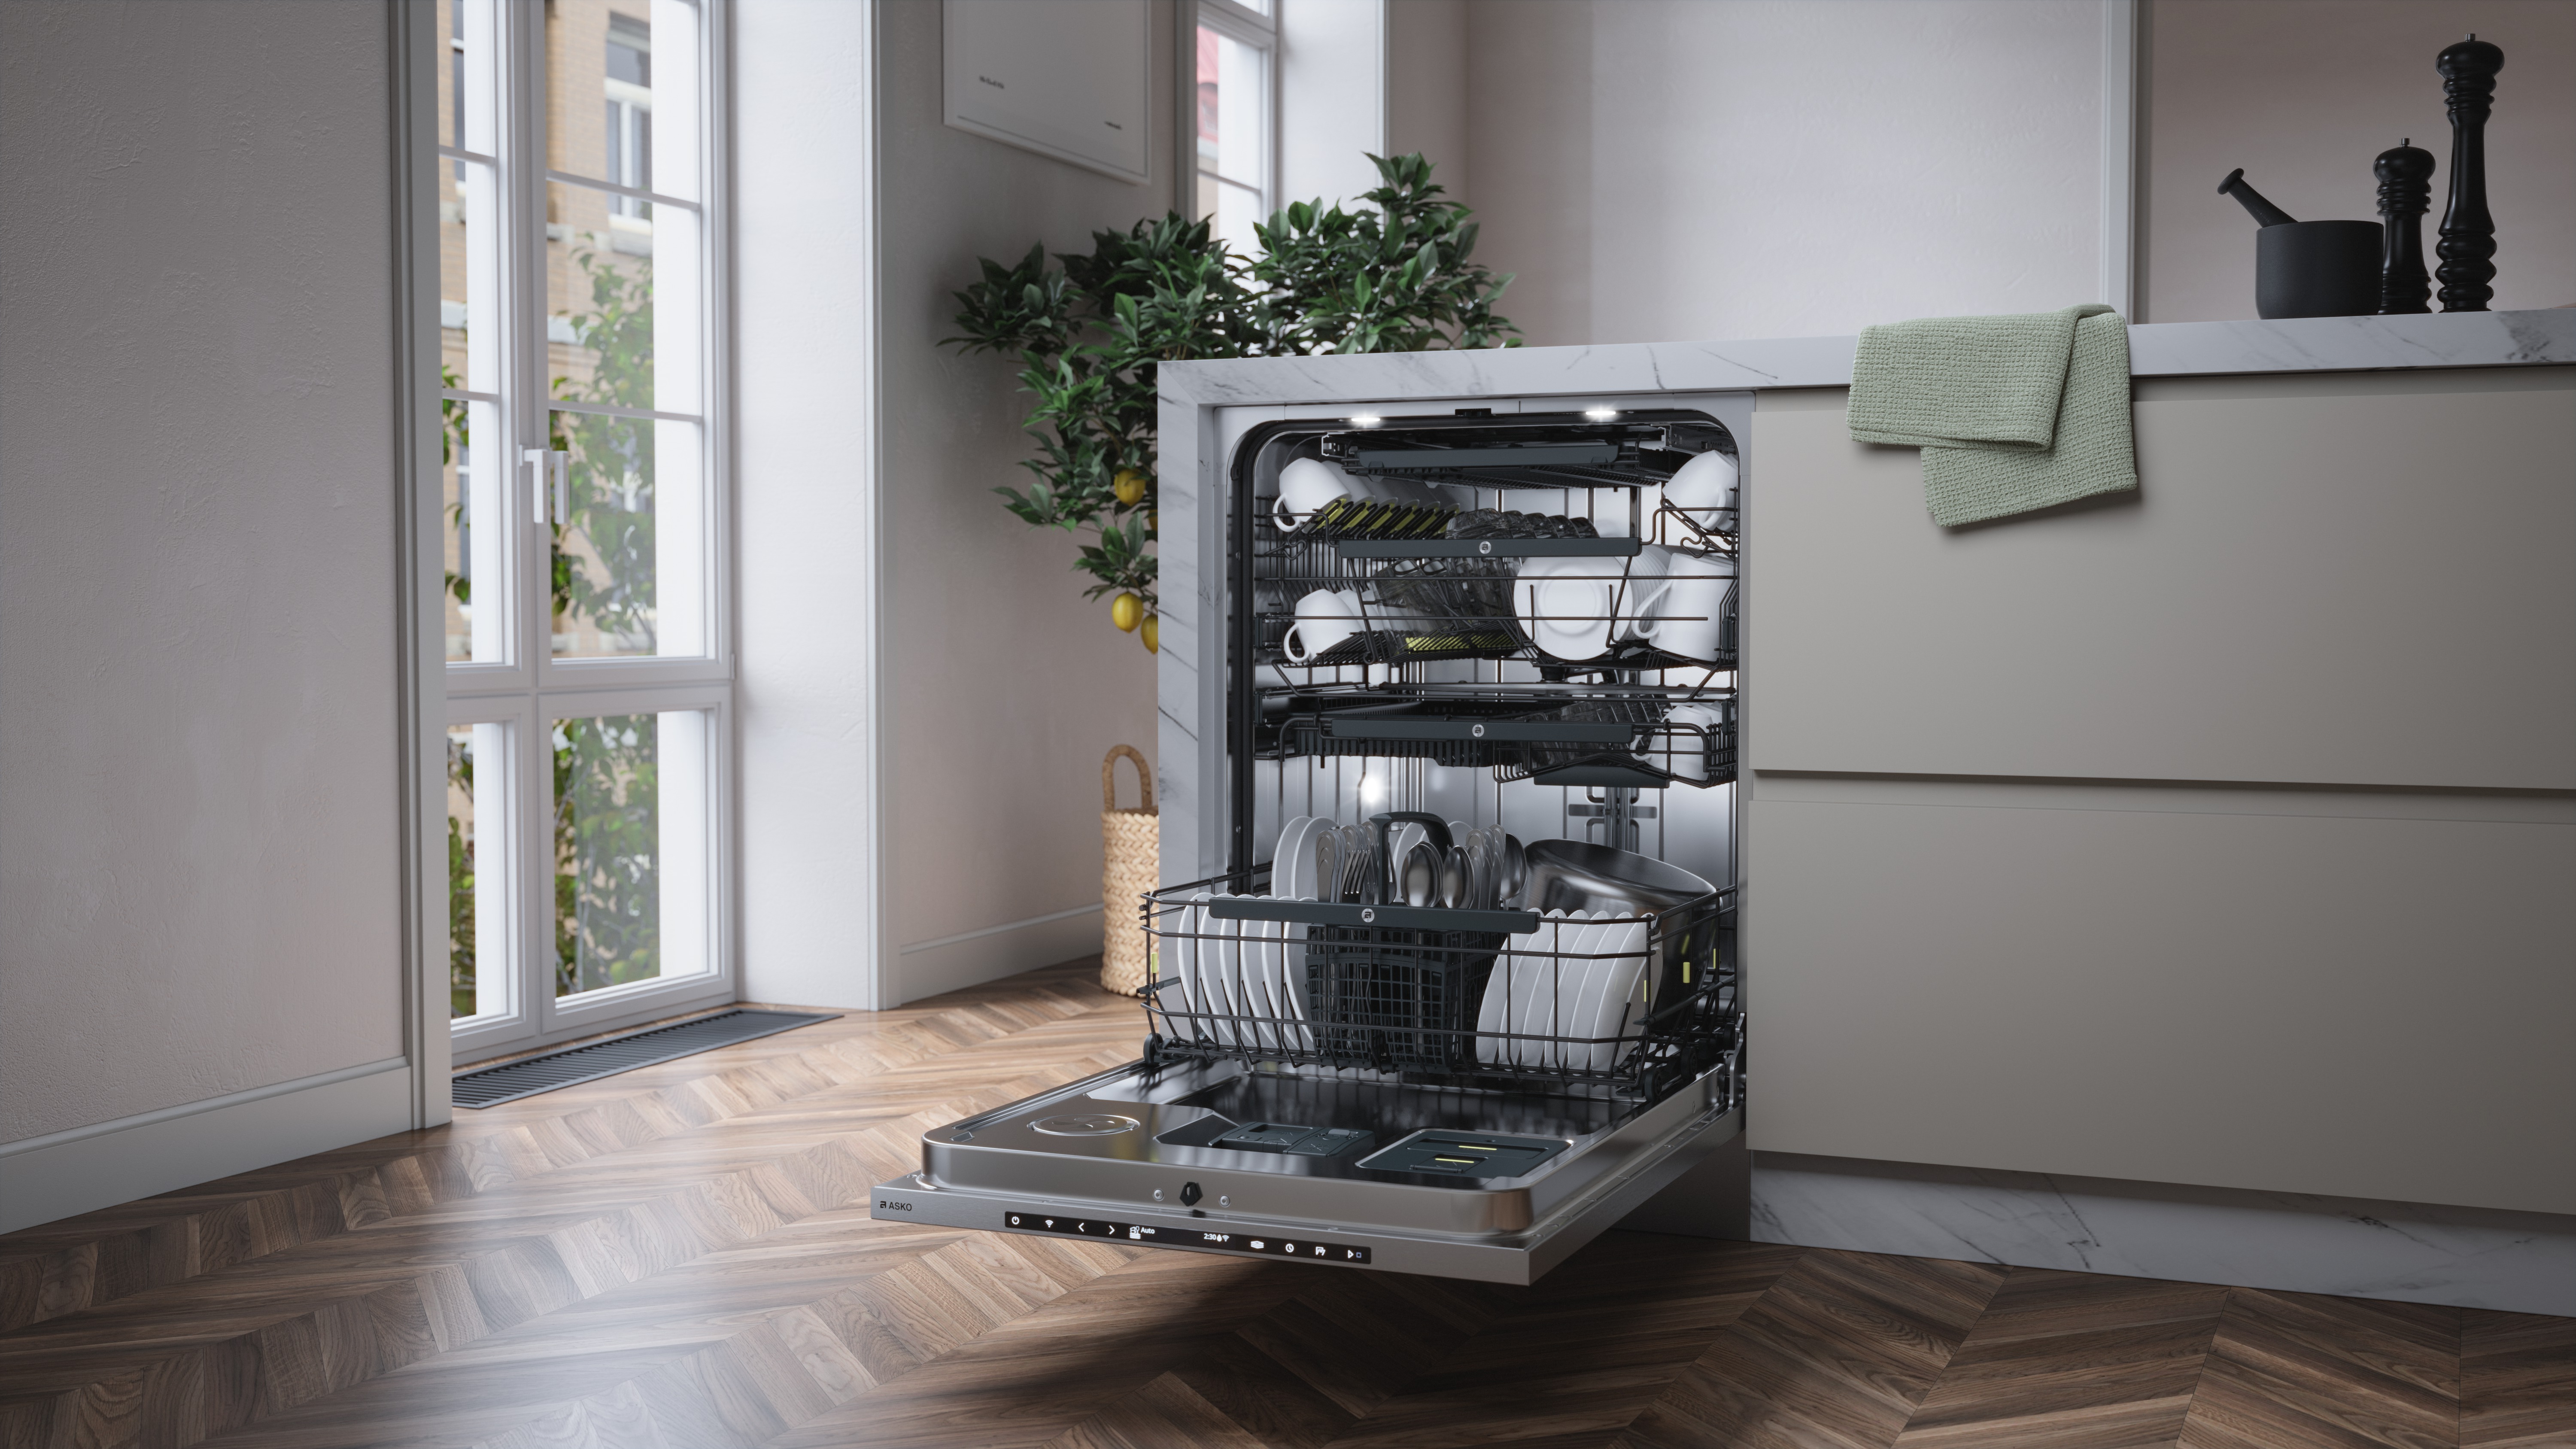 Save Up To $600 On Selected ASKO Dishwashers* at Hart & Co